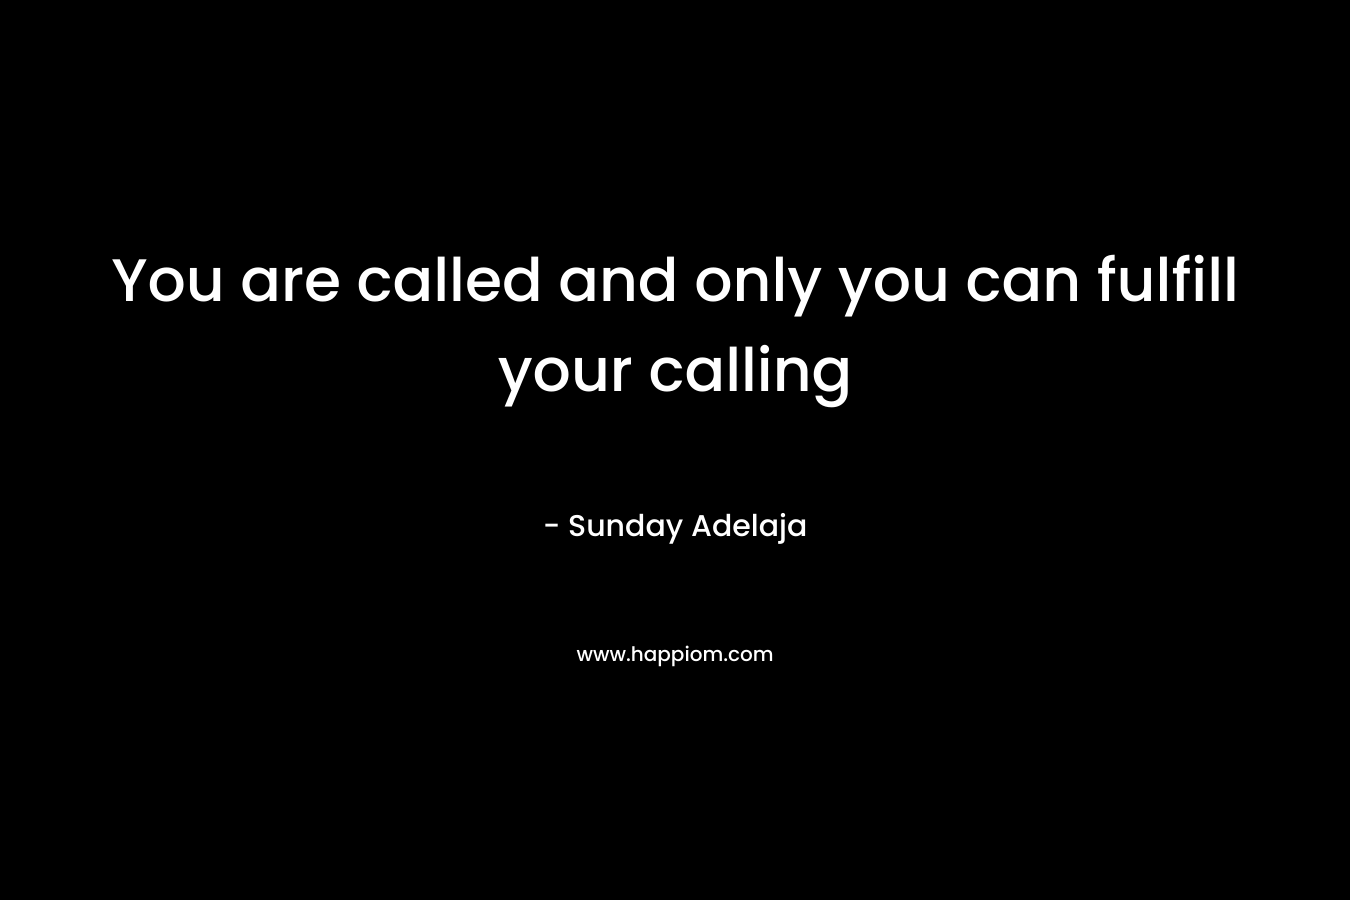 You are called and only you can fulfill your calling